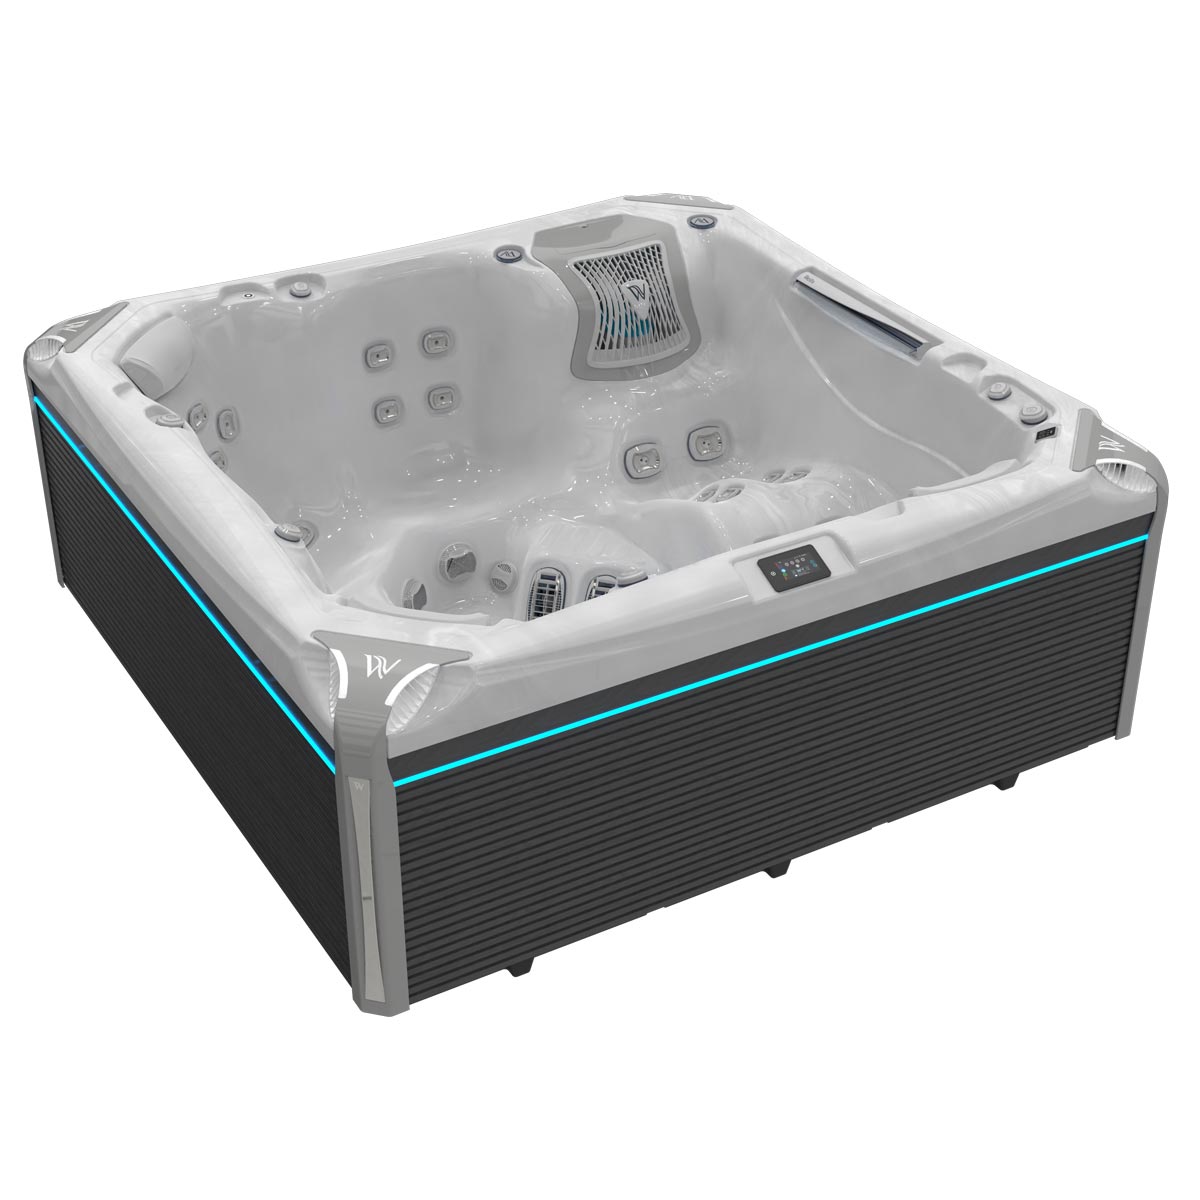 Kilimanjaro Life hottub, Sterling silver spa, Side view Whirlpool, deluxe edition